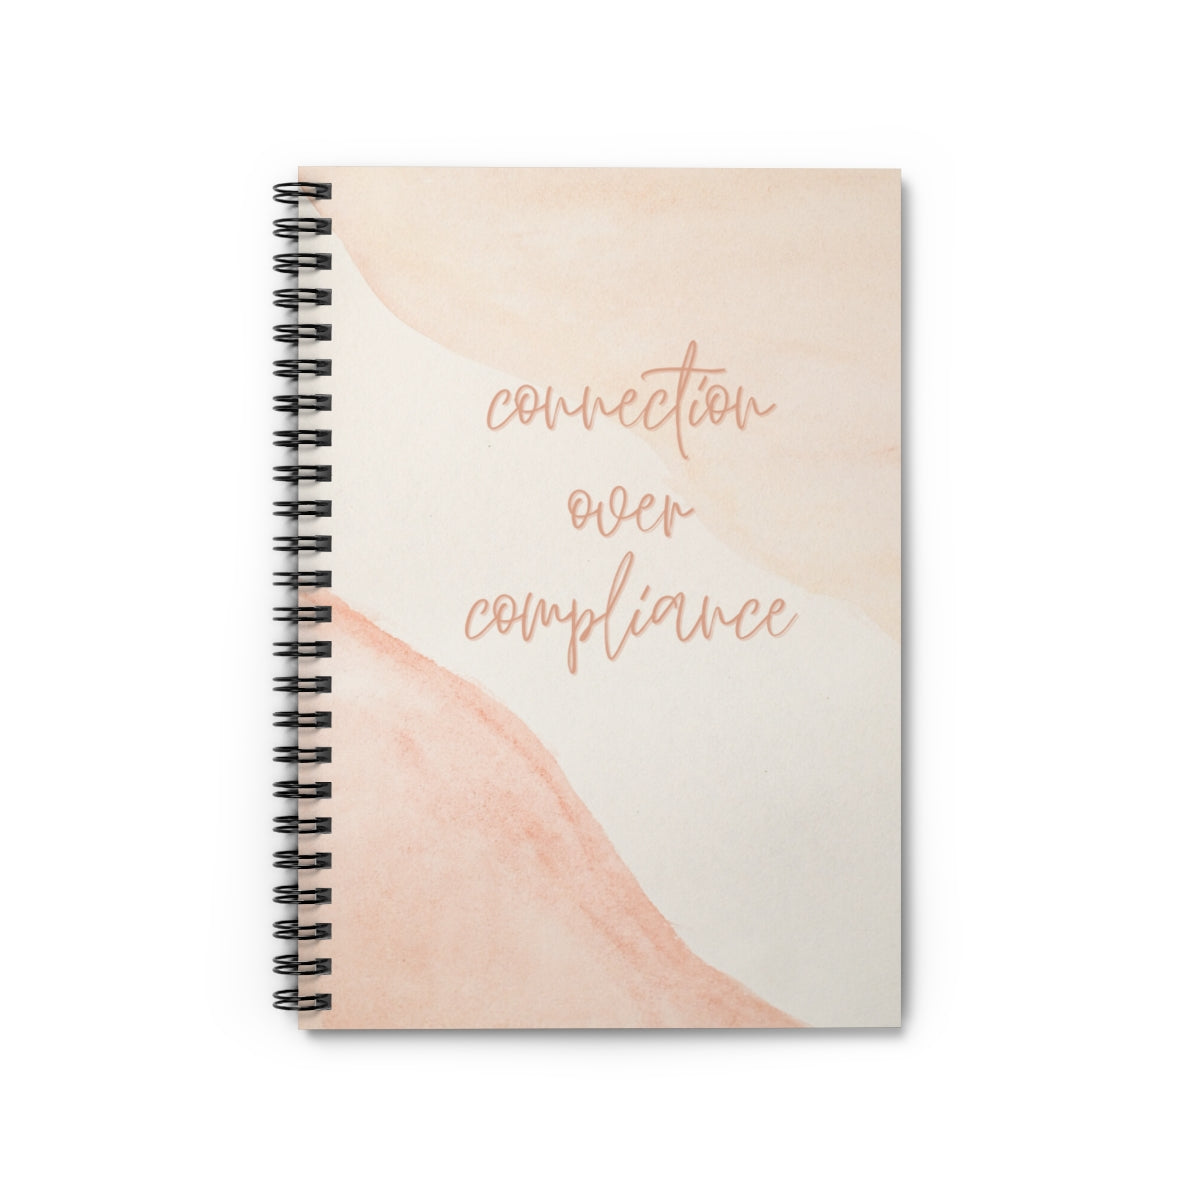 Connection over Compliance Spiral Notebook - Ruled Line